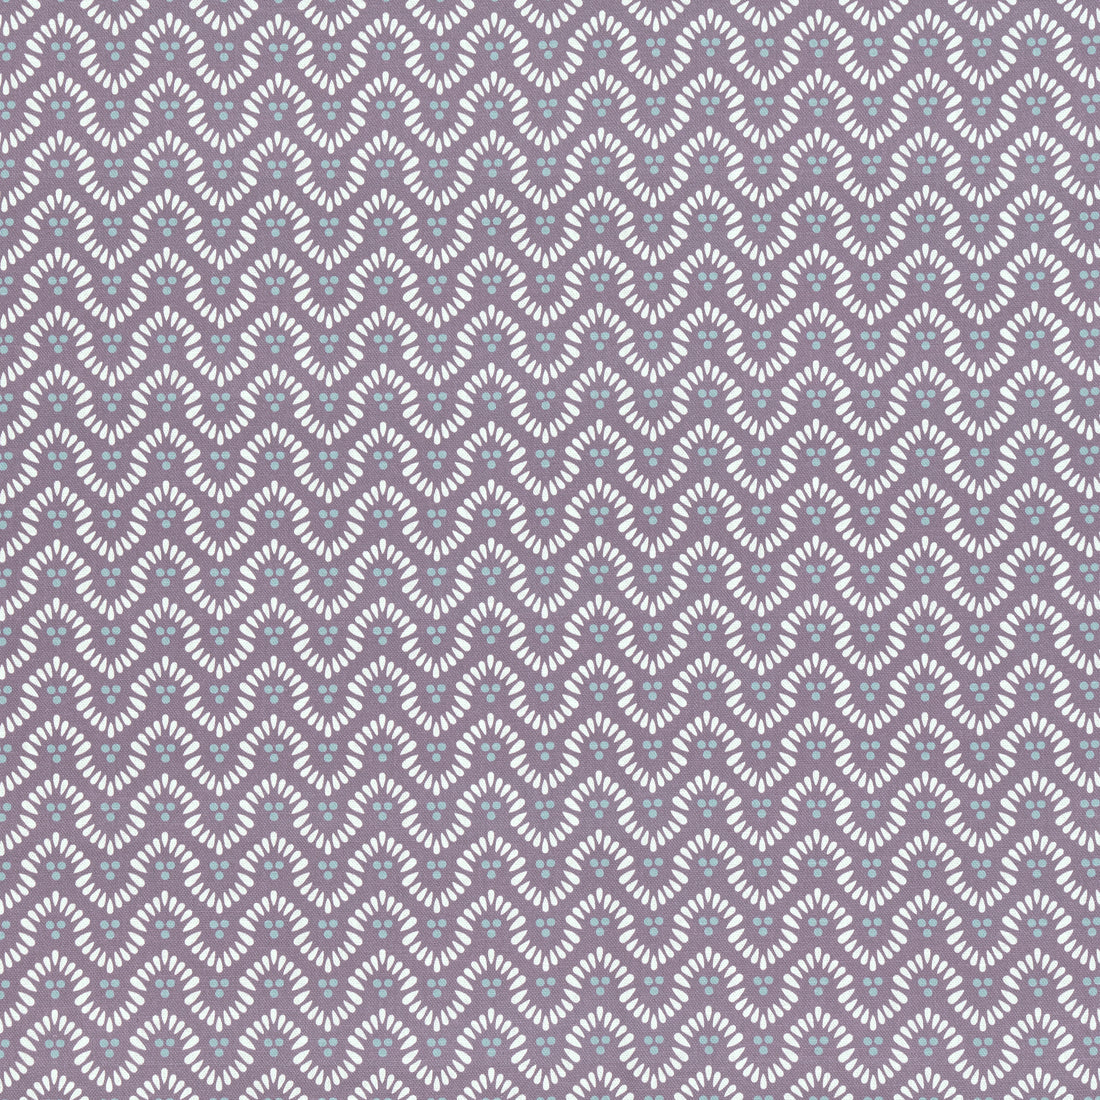 Wynford fabric in plum color - pattern number AF23148 - by Anna French in the Willow Tree collection